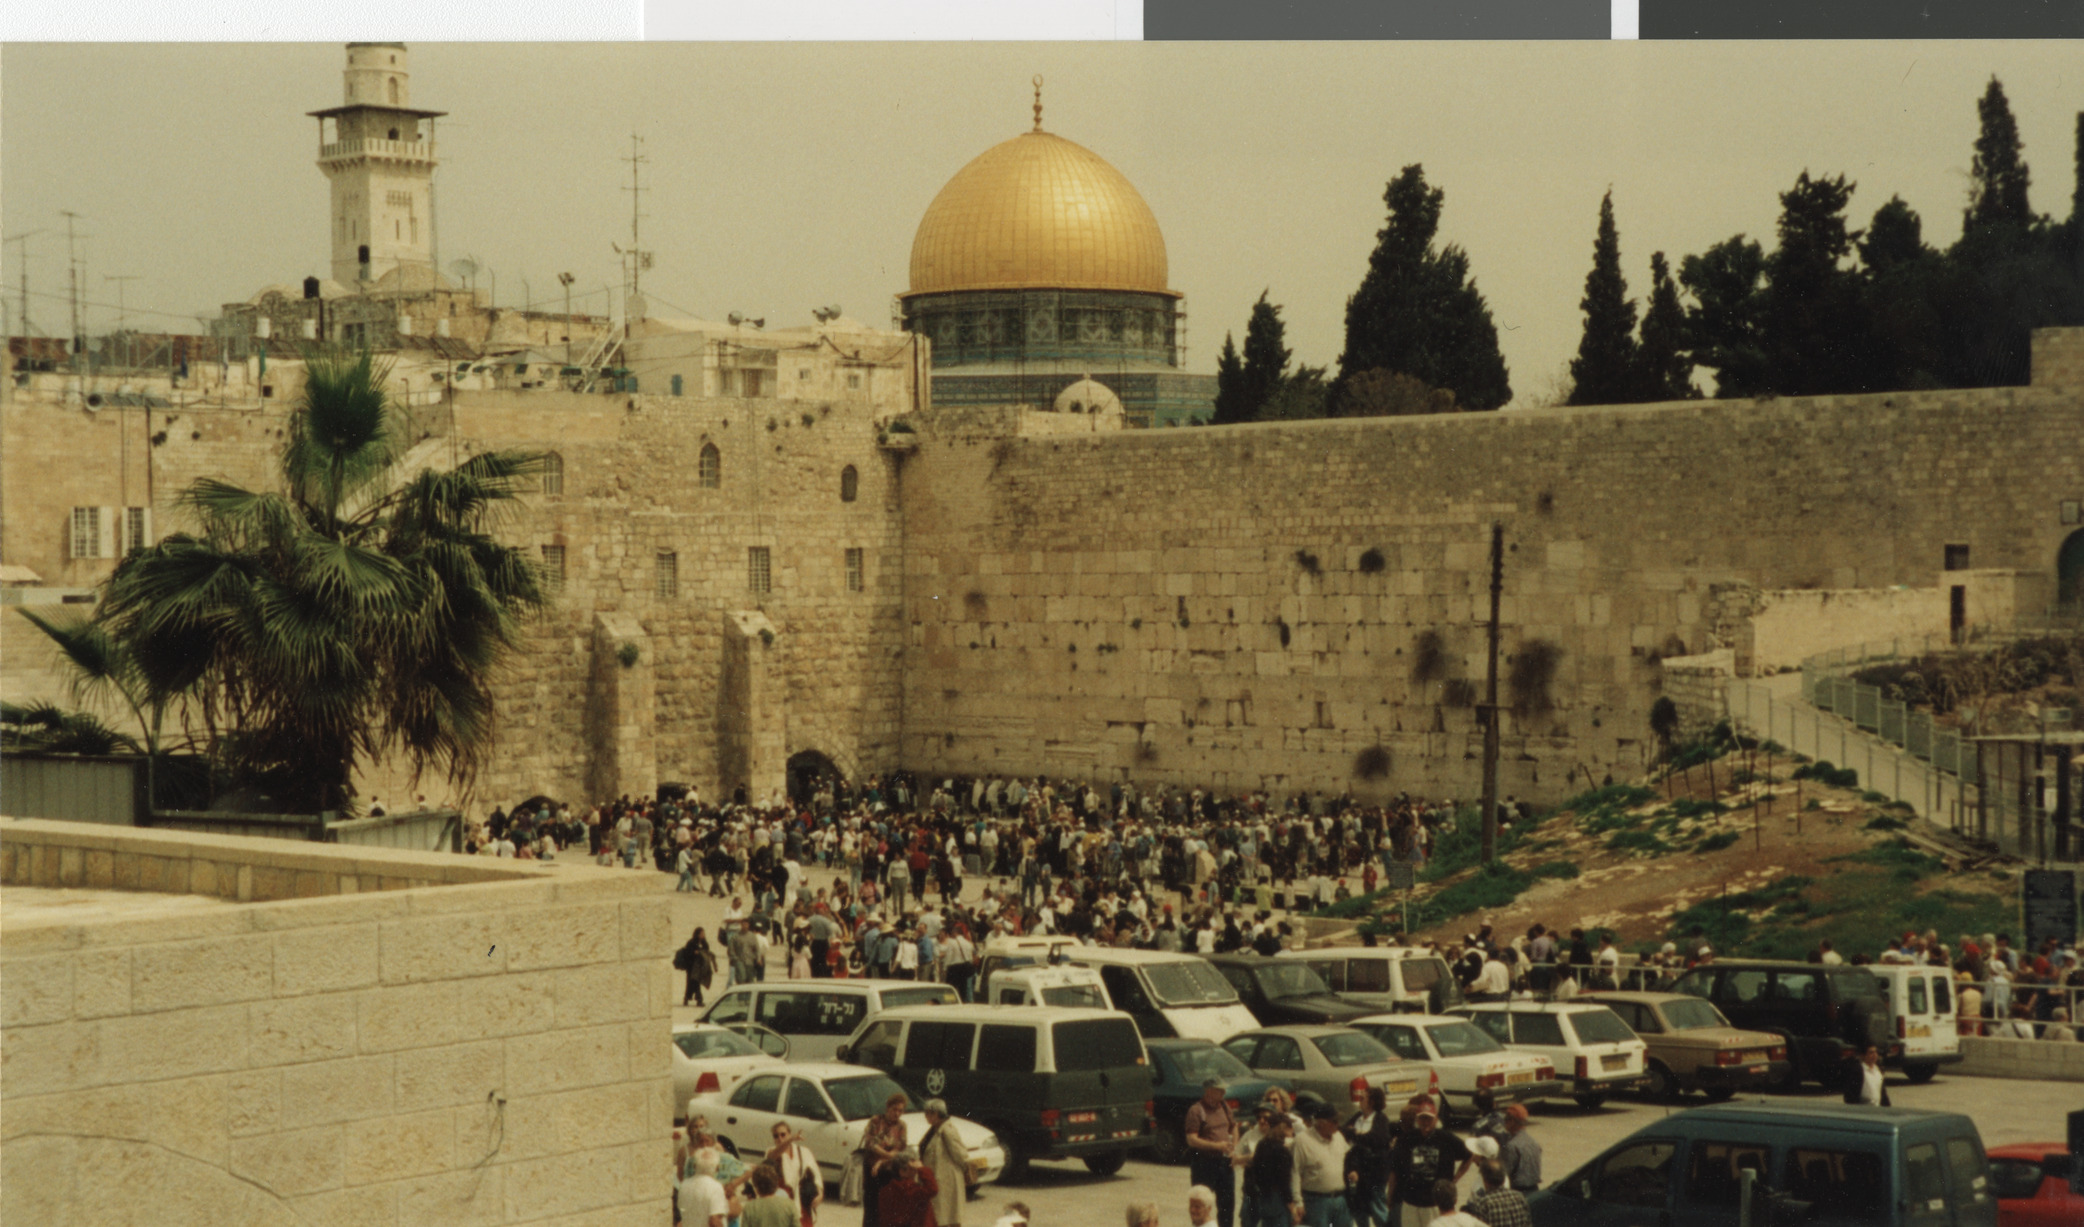 Photograph of Dome of the Rock and Western Wall